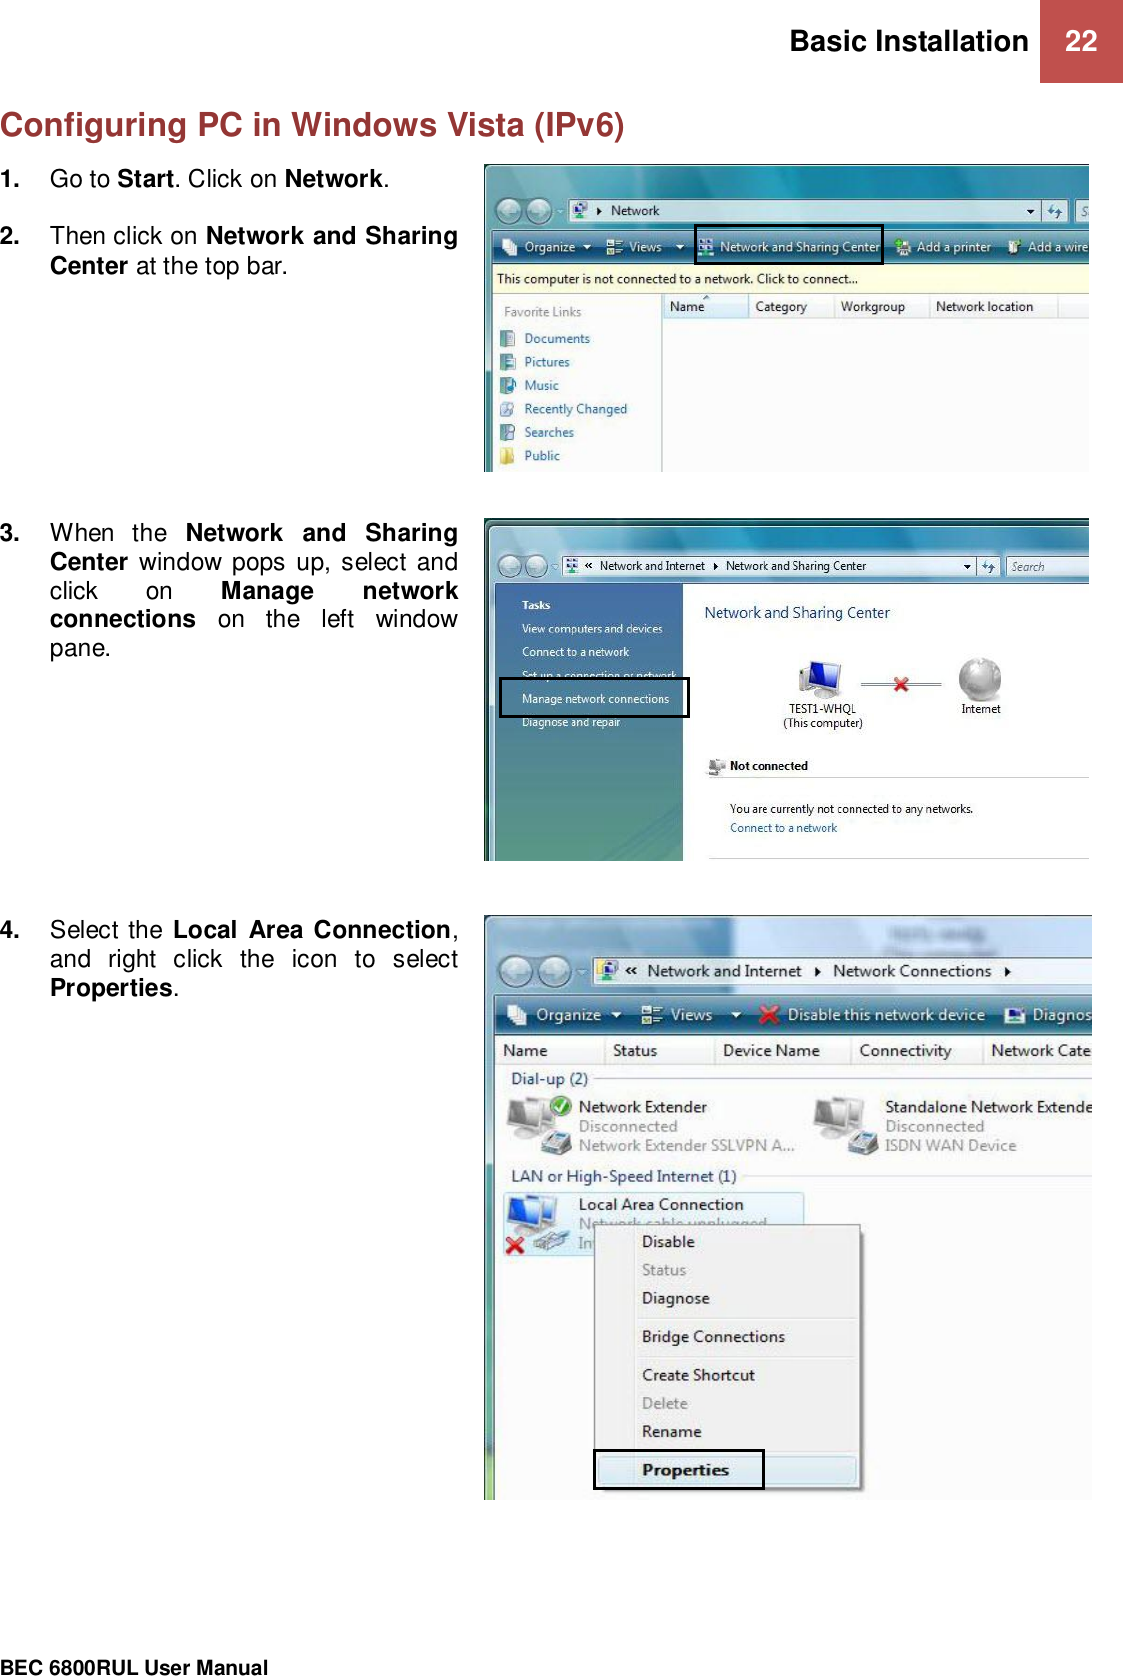 Basic Installation 22                                                 BEC 6800RUL User Manual  Configuring PC in Windows Vista (IPv6)     1. Go to Start. Click on Network.  2. Then click on Network and Sharing Center at the top bar.  3. When  the  Network  and  Sharing Center  window pops up, select and click  on  Manage  network connections  on  the  left  window pane.  4. Select the Local  Area Connection, and  right  click  the  icon  to  select Properties.  